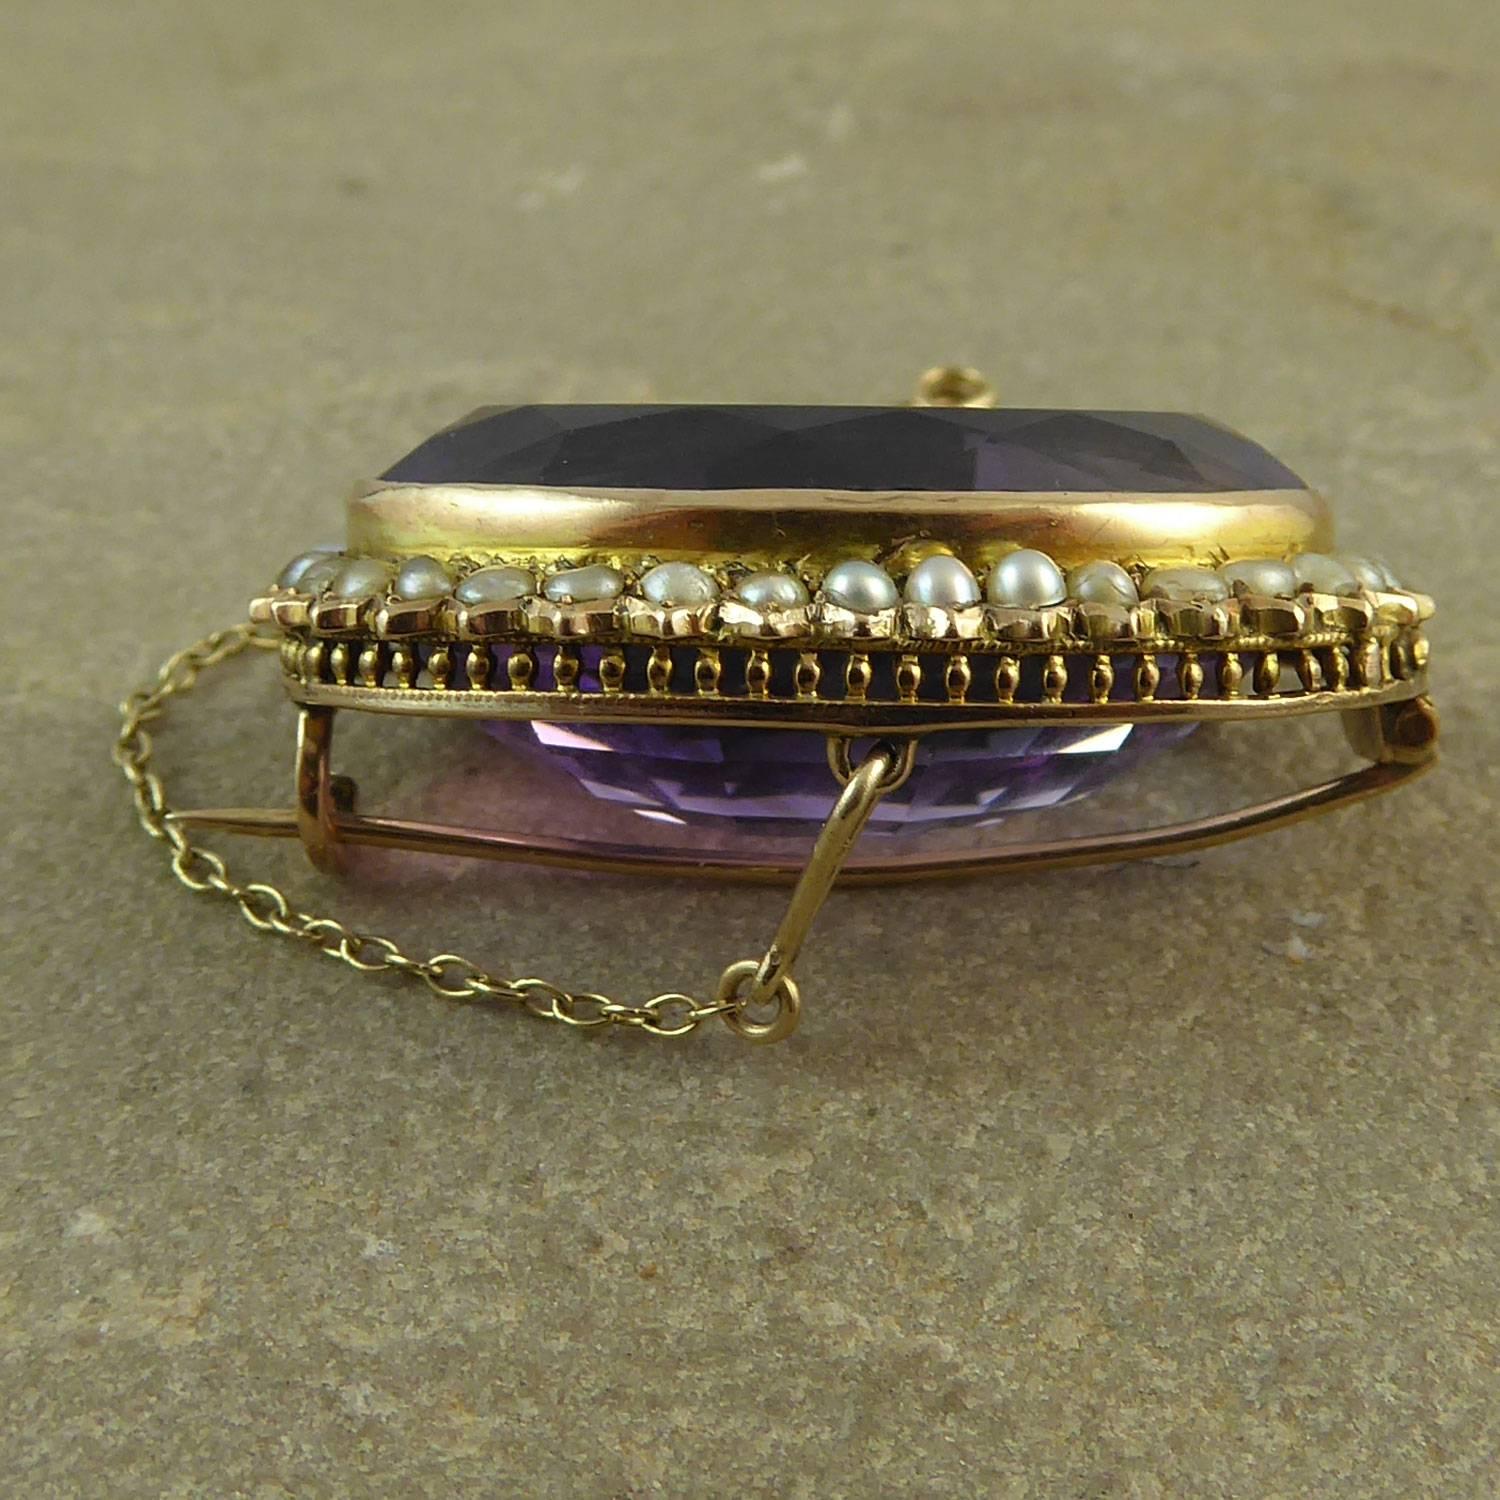 A grand amethyst and pearl brooch from the later Victorian era set with an utterly beautiful oval and faceted amethyst in a shade of purple that's not too dark, not too pale - just 